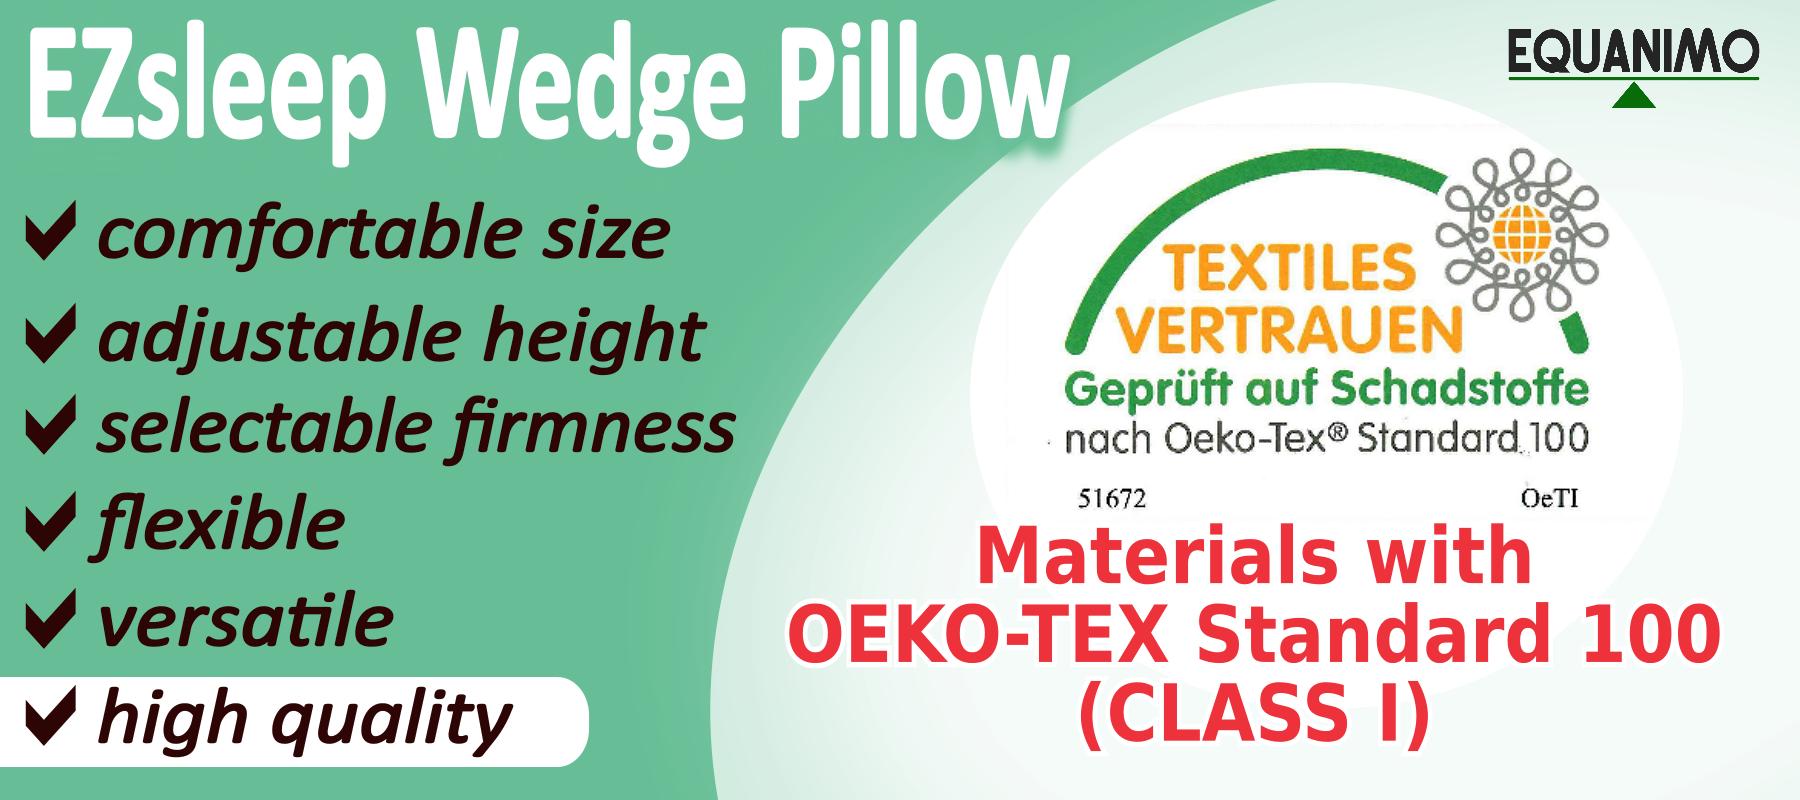 EZsleep Wedge Pillow is made from high quality materials mit Oeko-Tex Standard 100 (Class I)